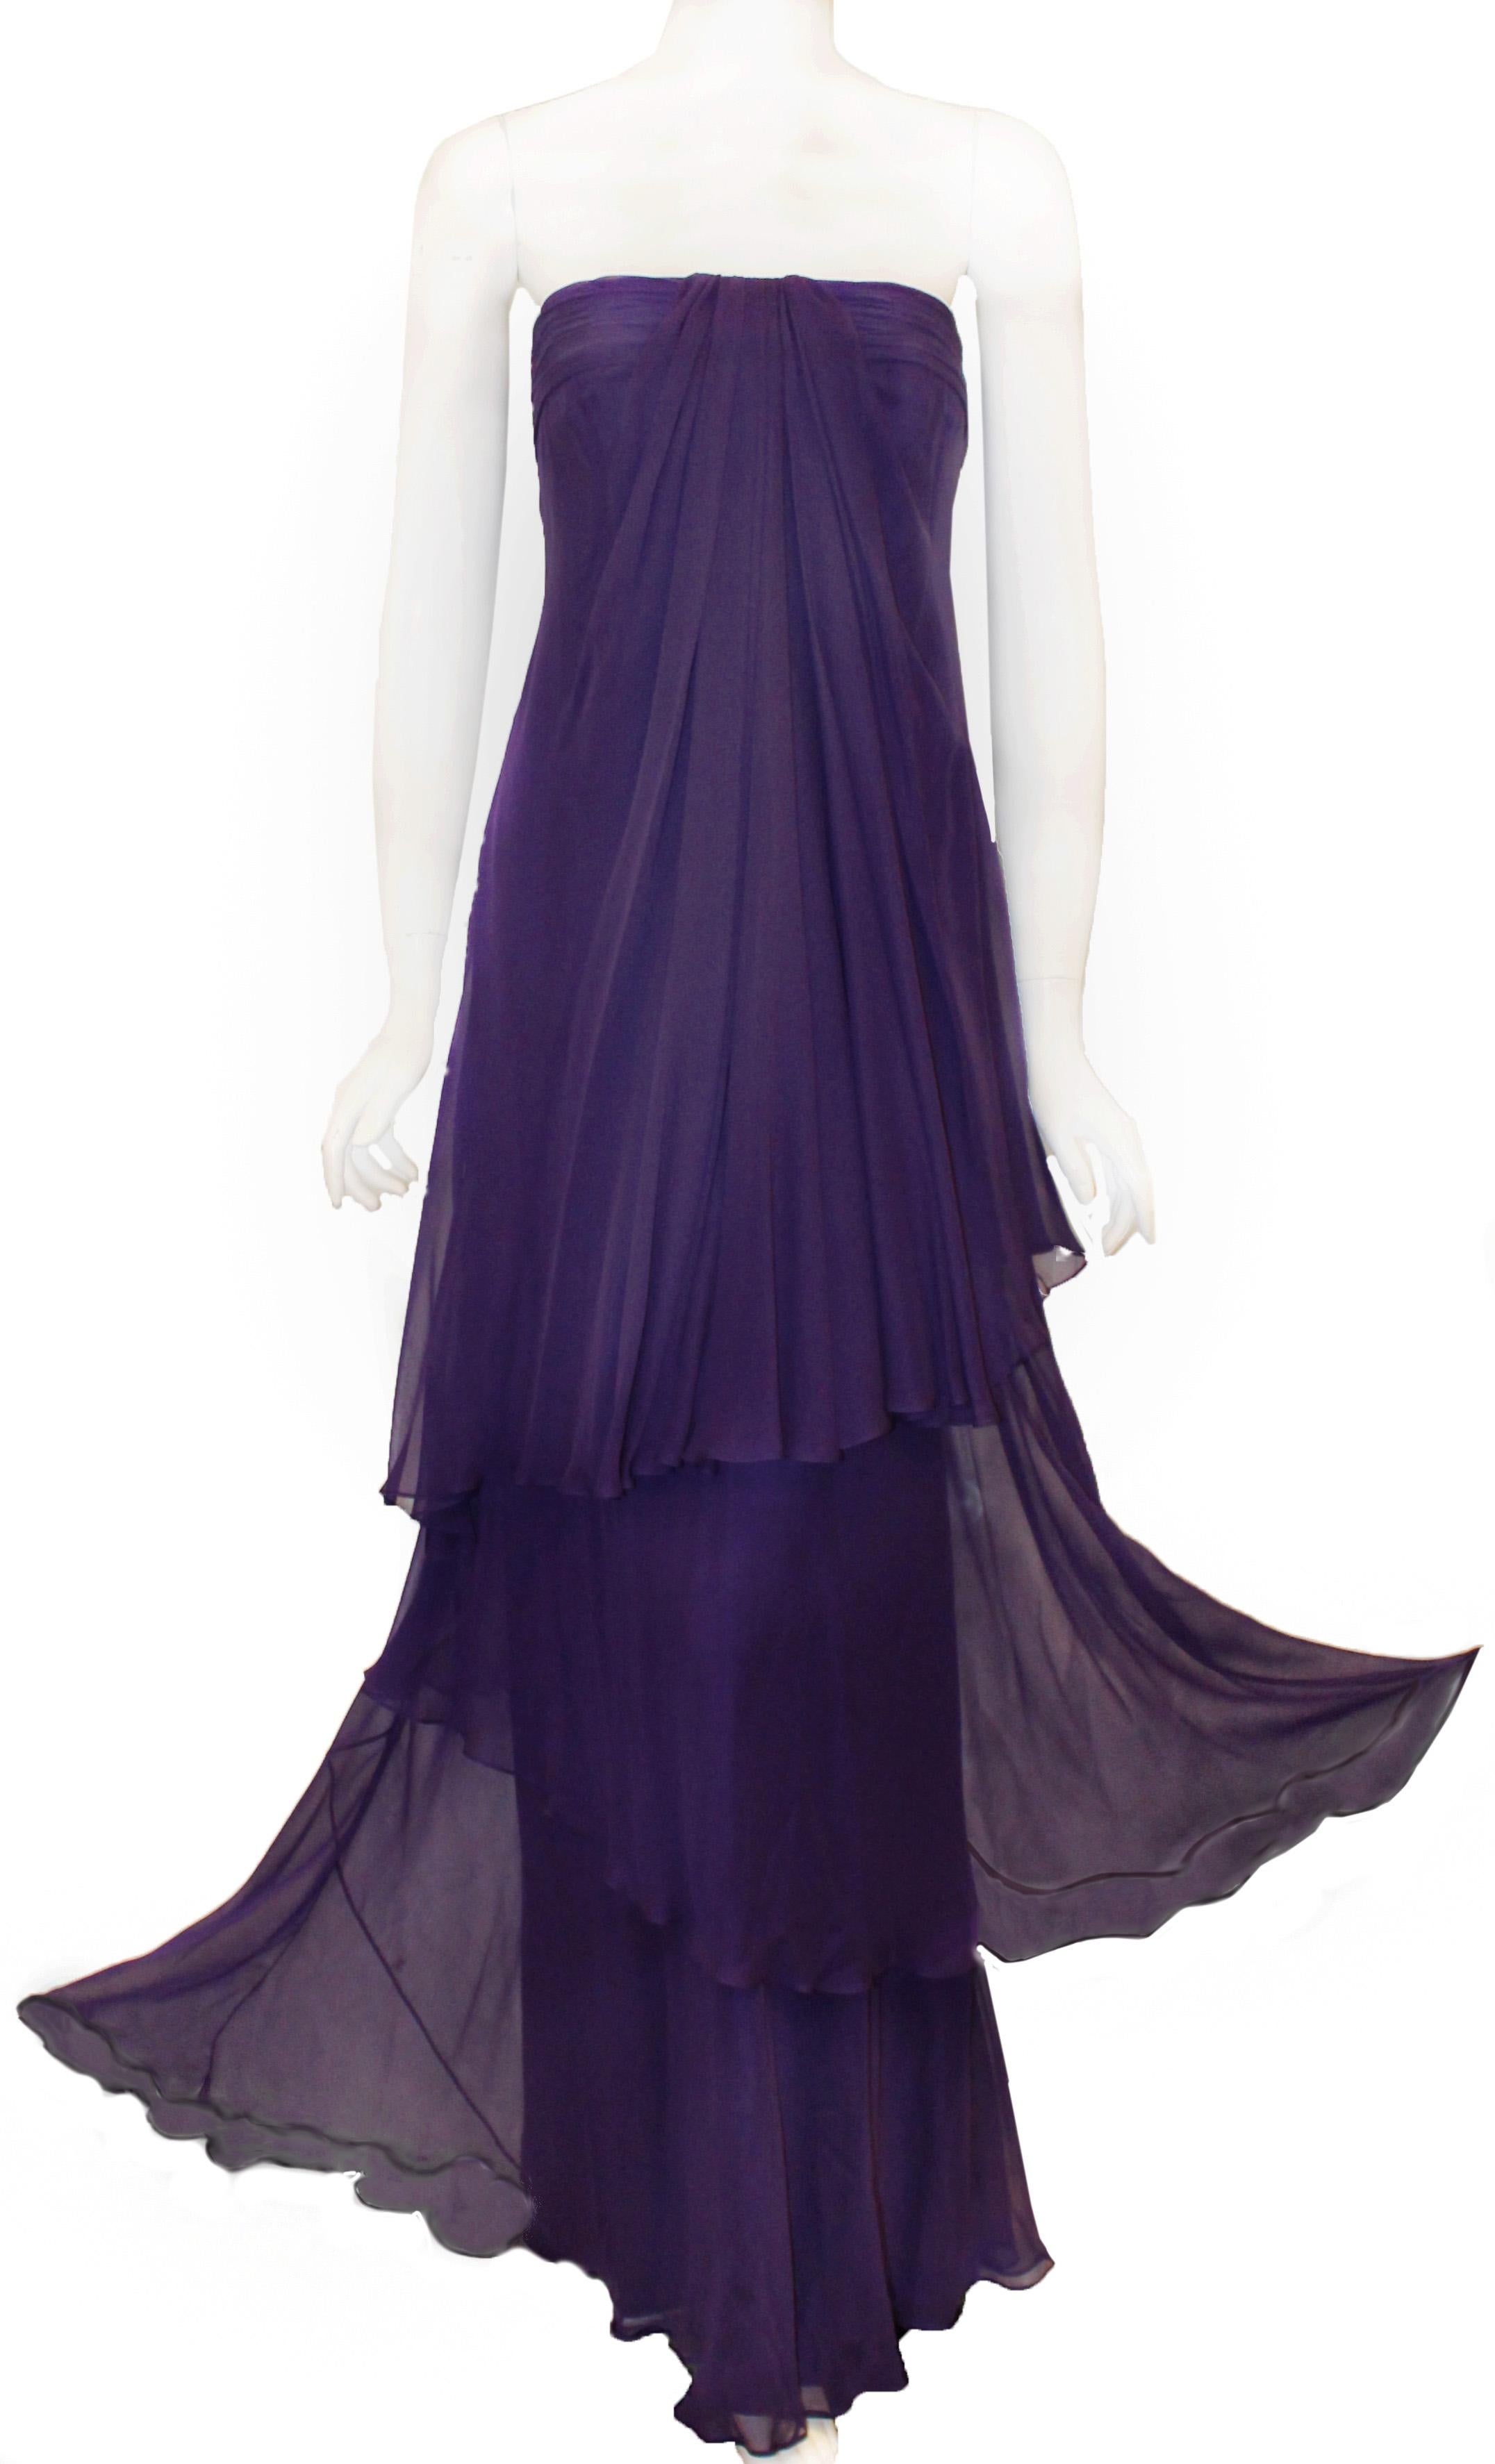 Pamela Roland elegant three tier purple silk strapless gown is lined in purple silk charmuese.  This outstanding evening gown is gathered at the bust and drapes down the first tier to the hips.  All 3 tiers start at the bust and drape to the floor. 